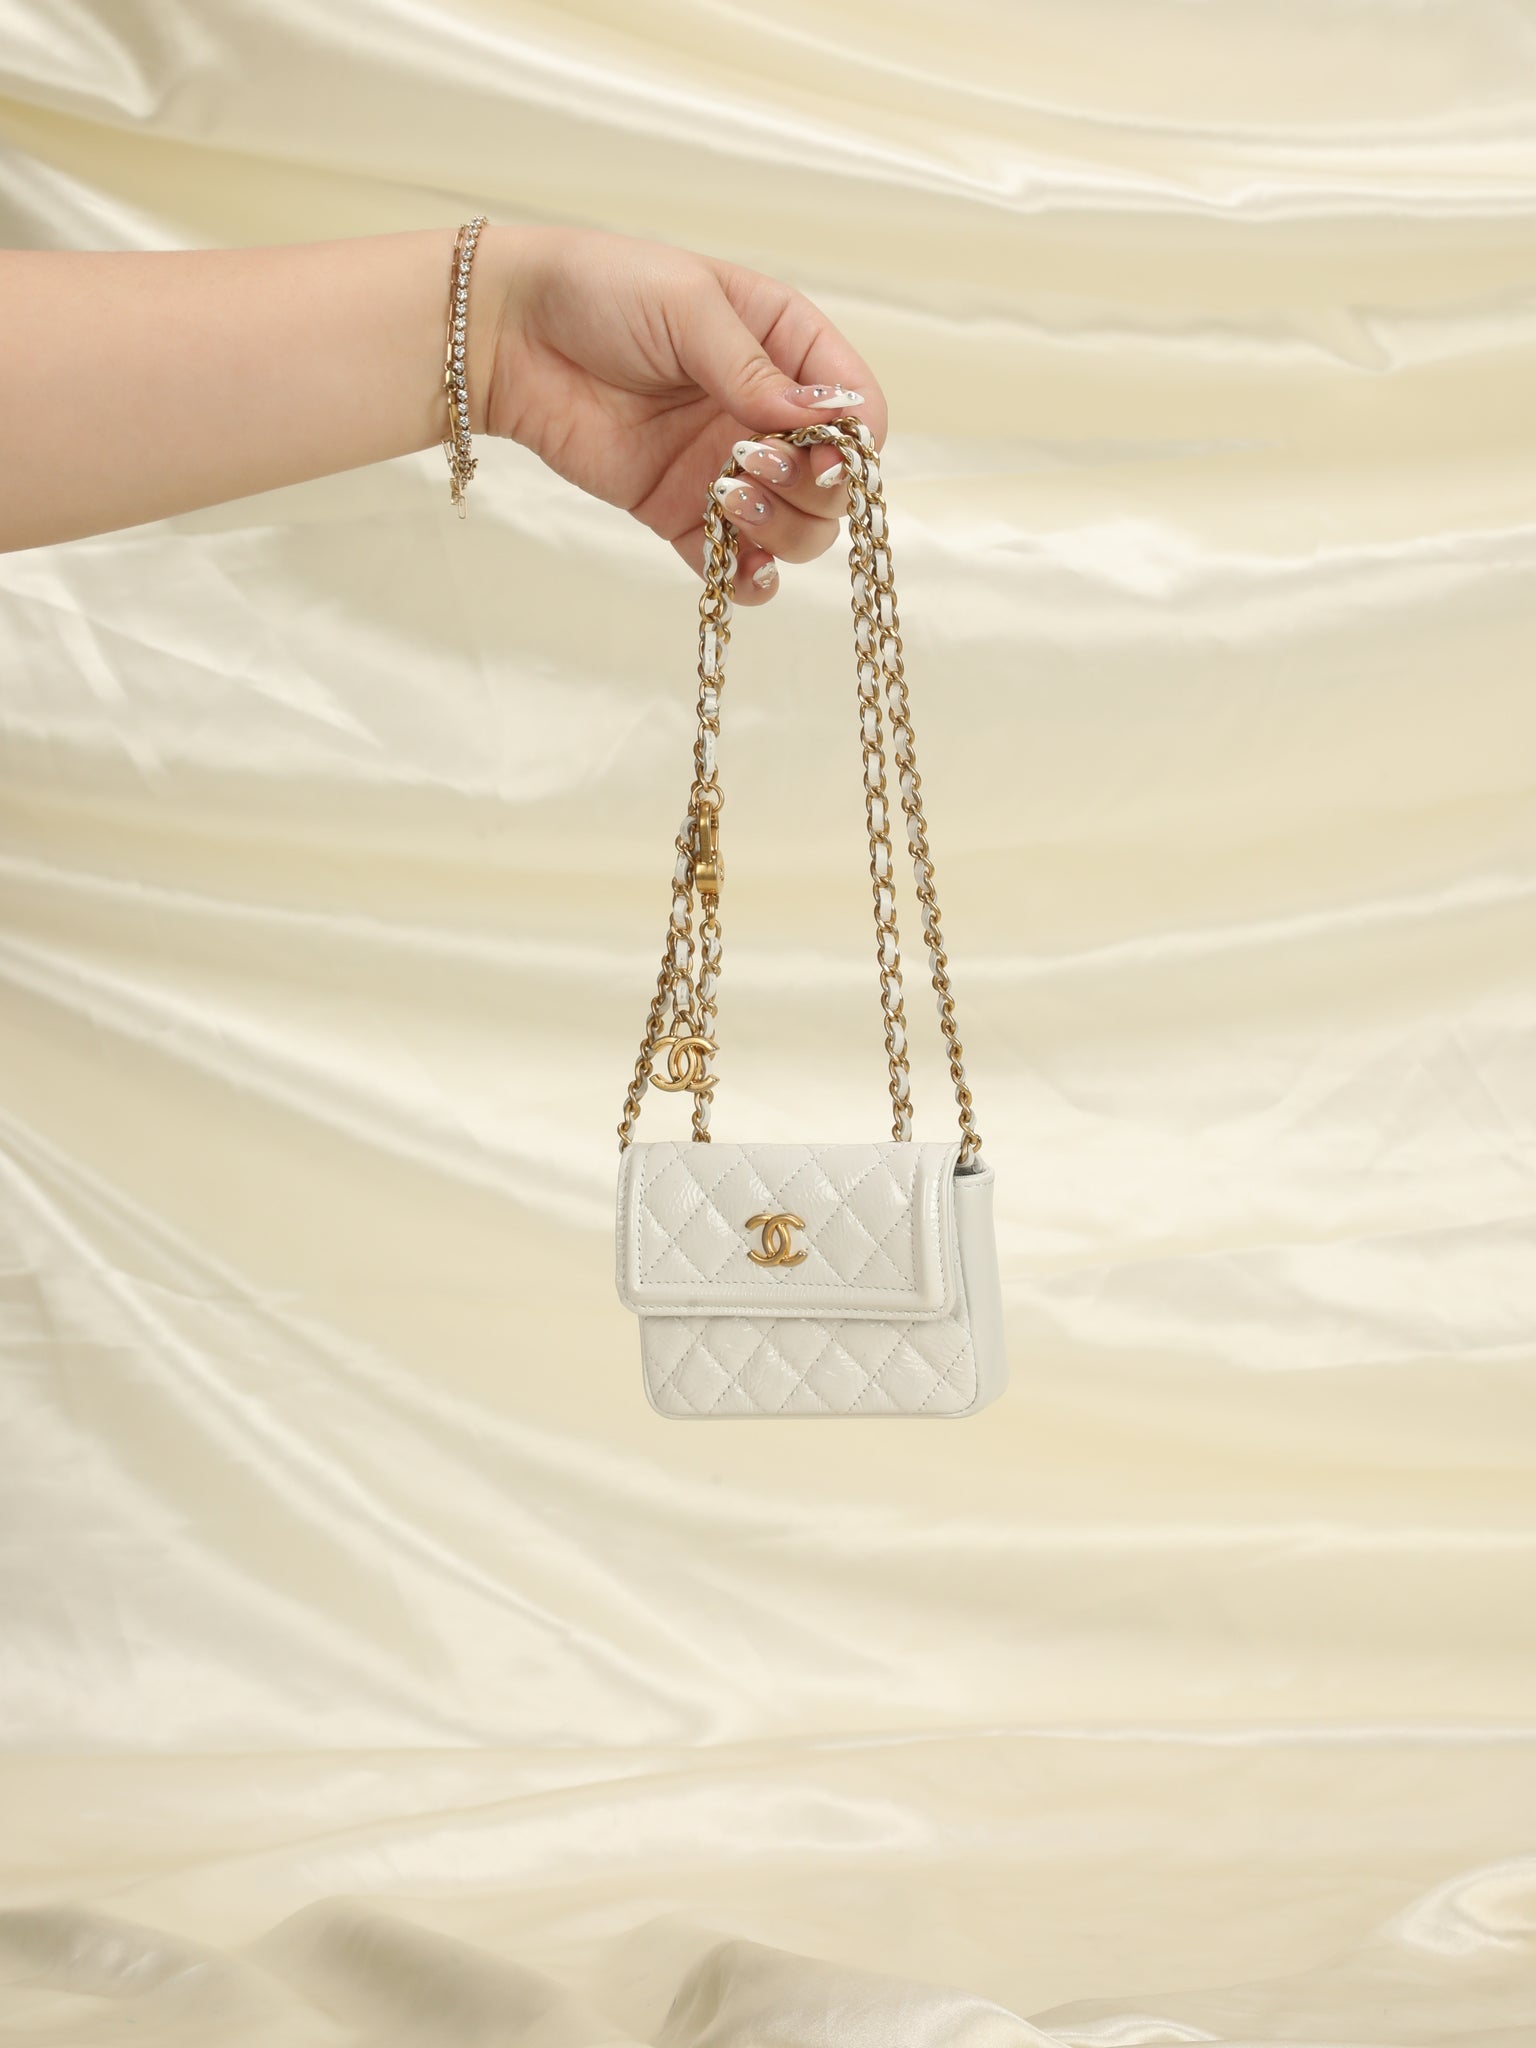 chanel belt bag with chain